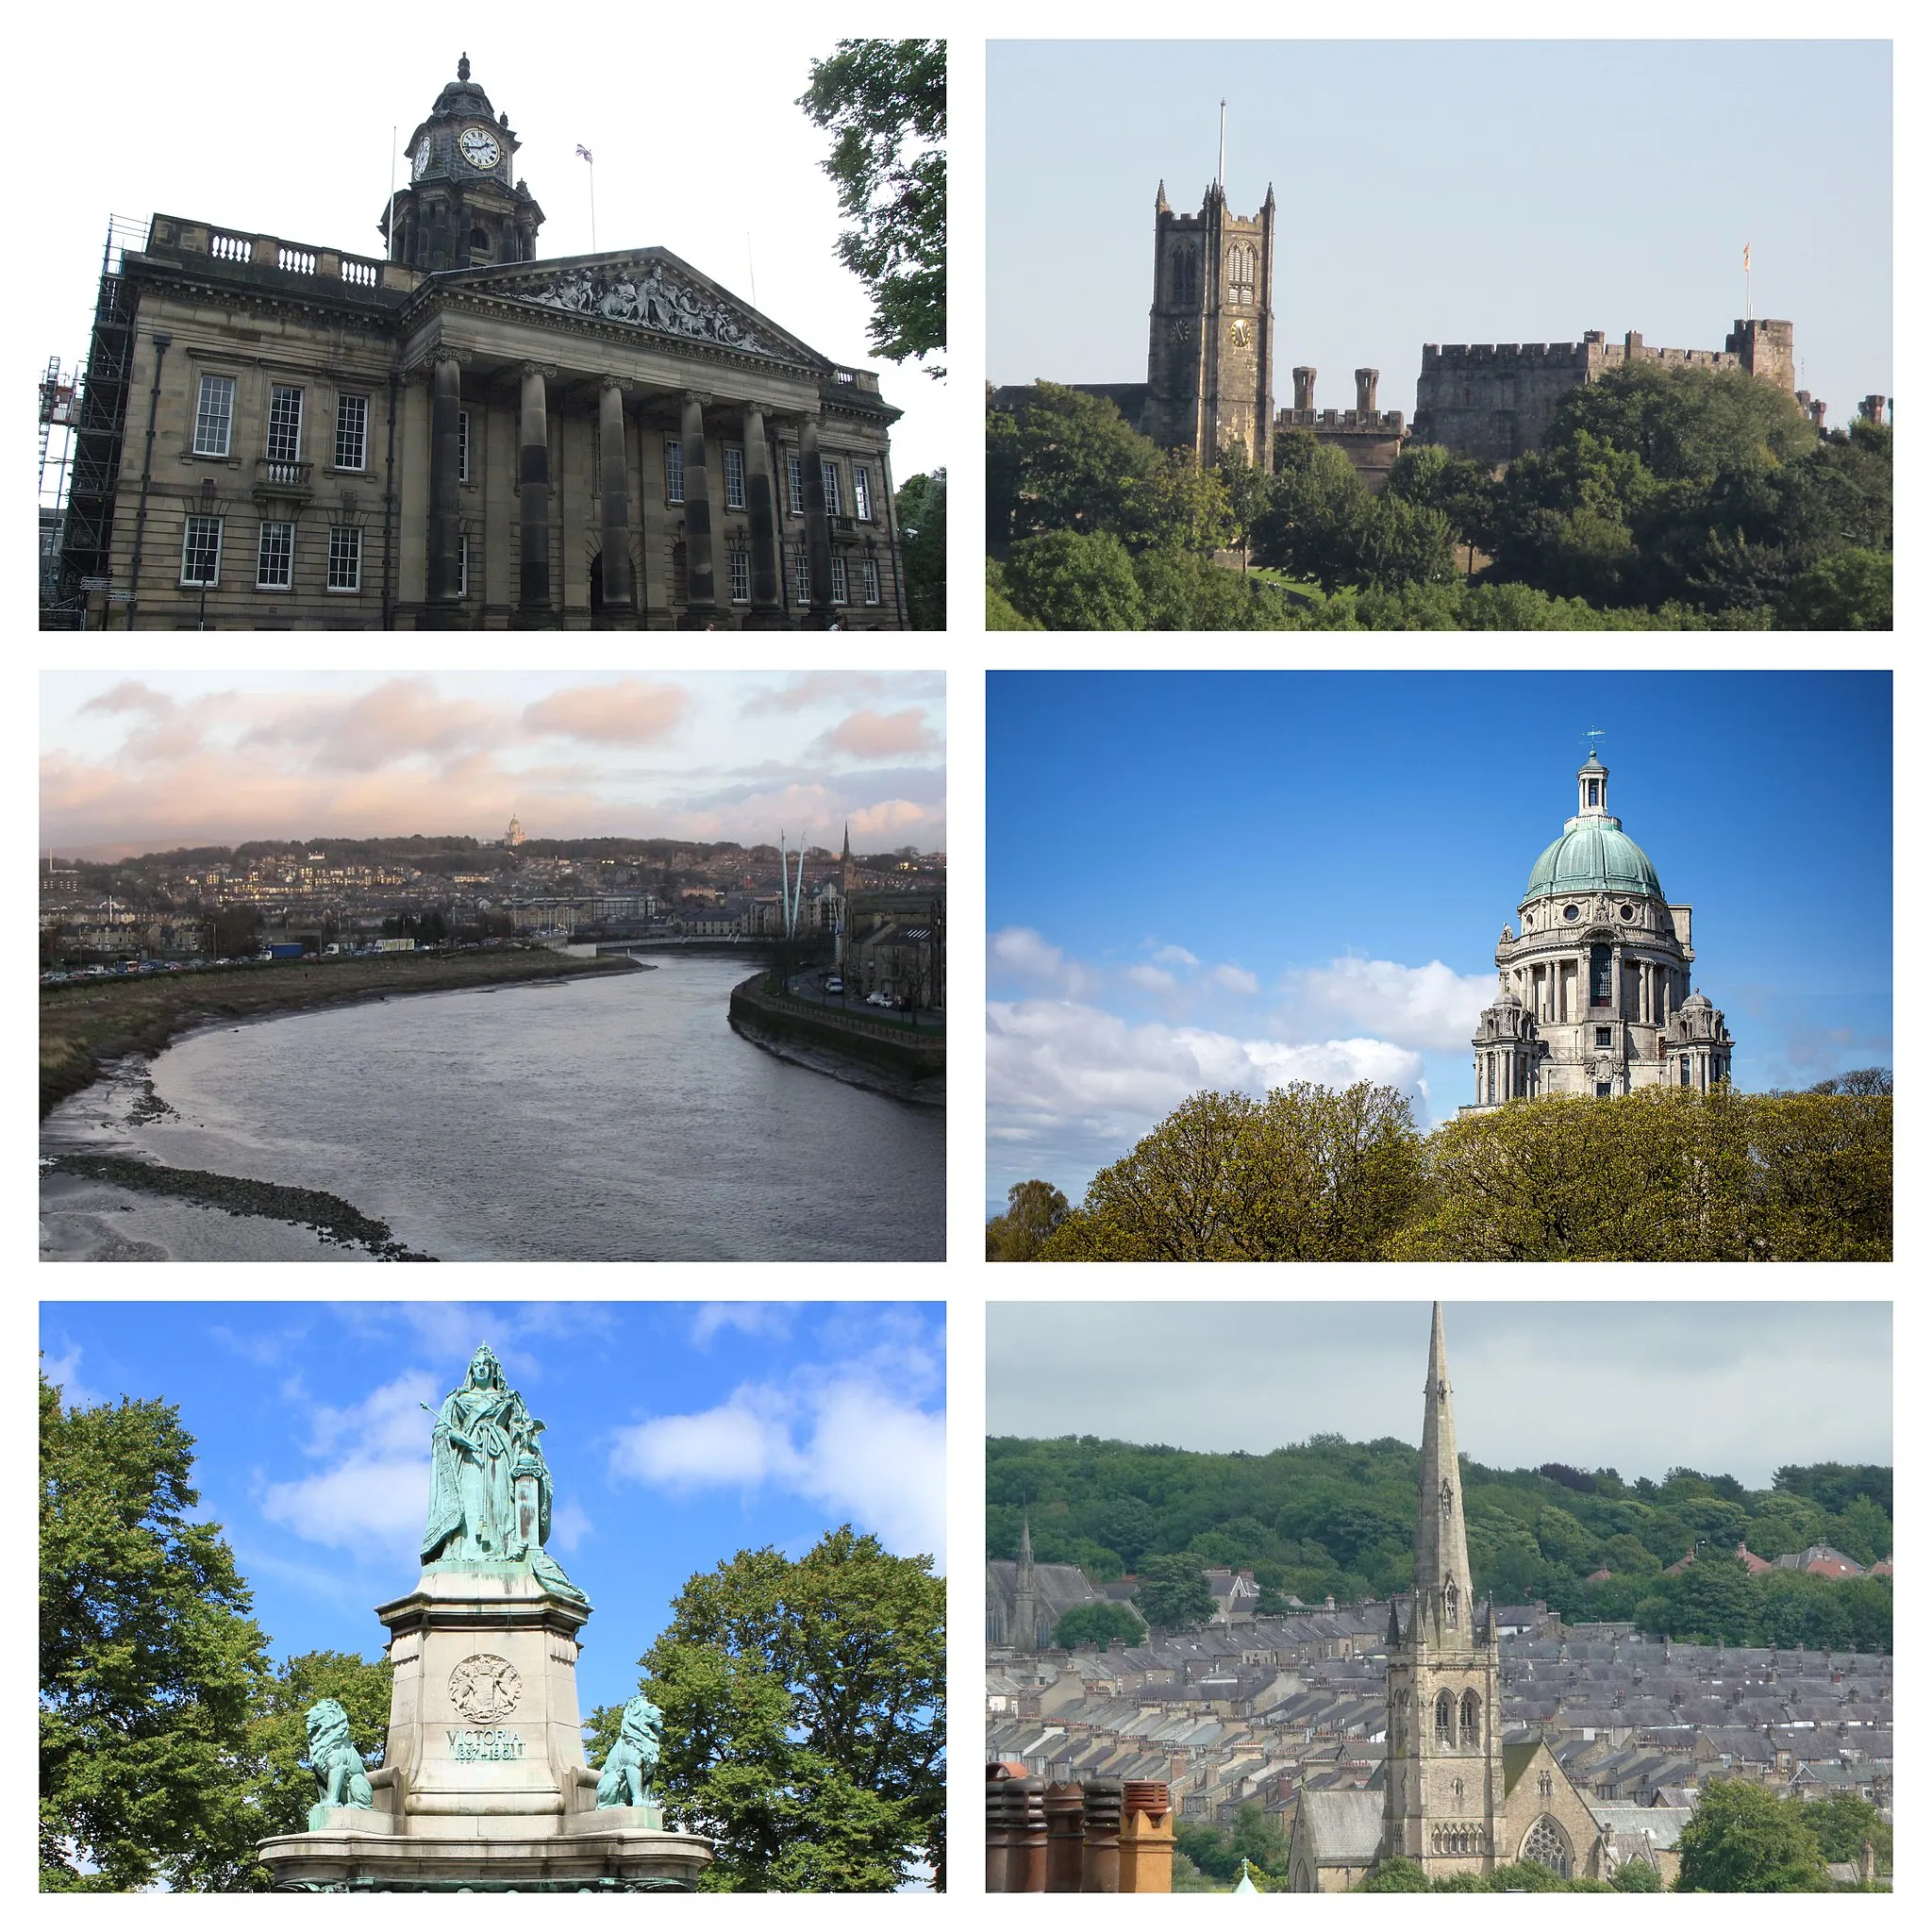 Photo showing: == Summary ==

DescriptionLancaster Collage 2022.jpg

Clockwise from top right: Lancaster Town Hall, Lancaster Priory and Castle, Ashton Memorial, Lancaster Cathedral, Queen Victoria Statue and Lancaster from Lune Bridge.
Date

22:55, 27 August 2022
Source

(File: Lancaster Town Hall 6822.JPG), (File:Lancaster Priory and Castle.JPG), (File:Ashton Memorial-IMG 0635.jpg), (File:Lancaster Cathedral 03.jpg), (File:The statue of Queen Victoria in Dalton Square, Lancaster - geograph.org.uk - 2547243.jpg), (File:Lancaster and the Lune from the Greyhound Bridge.jpg)
Author

Clem Rutter, Rochester, Kent(File:Lancaster Town Hall 6822.JPG) Antiquary(: ) PangolinOne(File:Ashton Memorial-IMG 0635.jpg) Immanuel Giel(File:Lancaster Cathedral 03.jpg) Michael Fox(File:The statue of Queen Victoria in Dalton Square, Lancaster - geograph.org.uk - 2547243.jpg) Lupin(File:Lancaster and the Lune from the Greyhound Bridge.jpg)